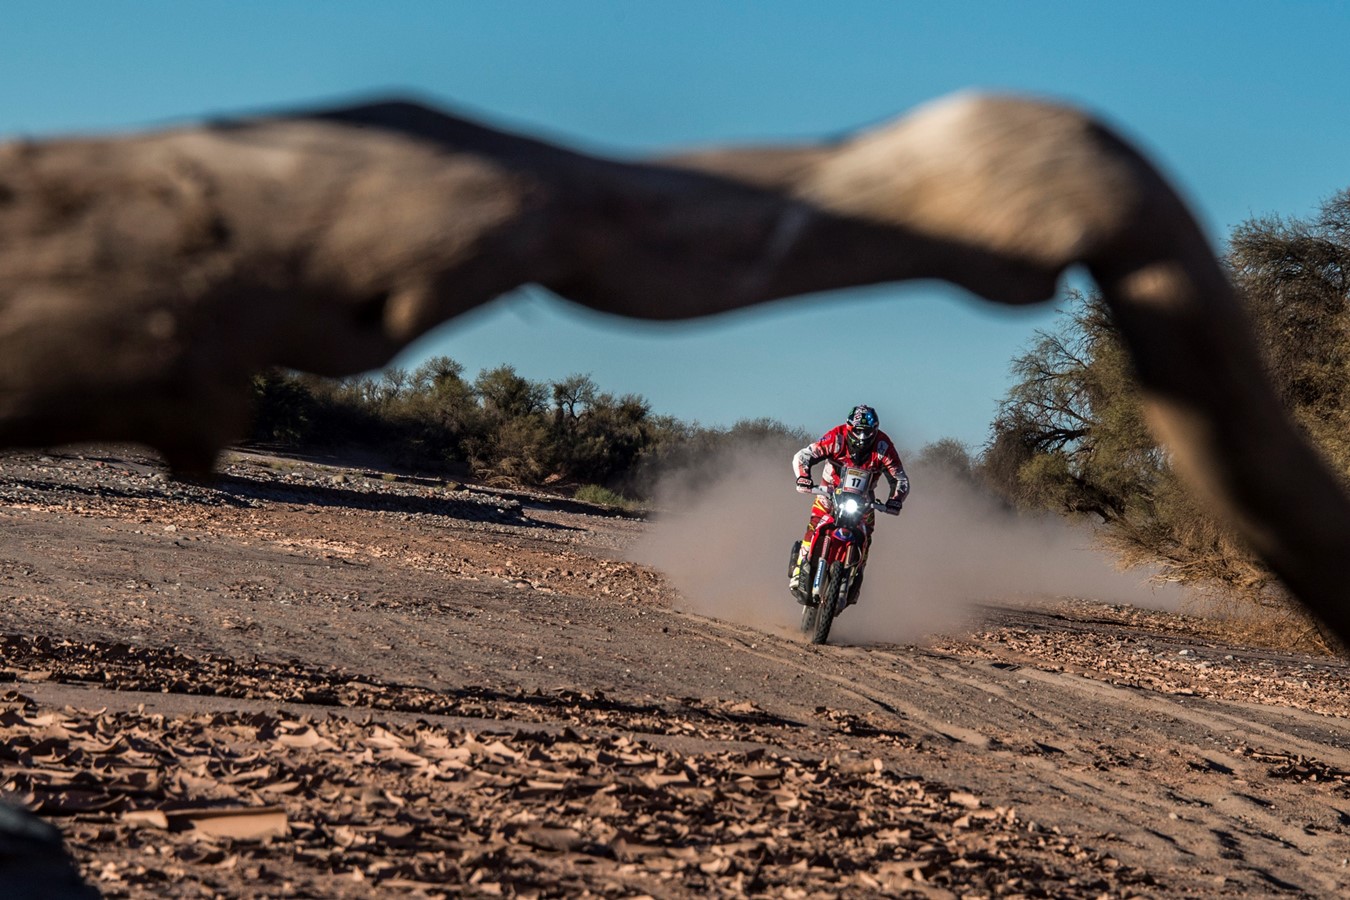 Monster Energy Honda Team takes the leadership in the Desafío Ruta 40 with a second stage one-two